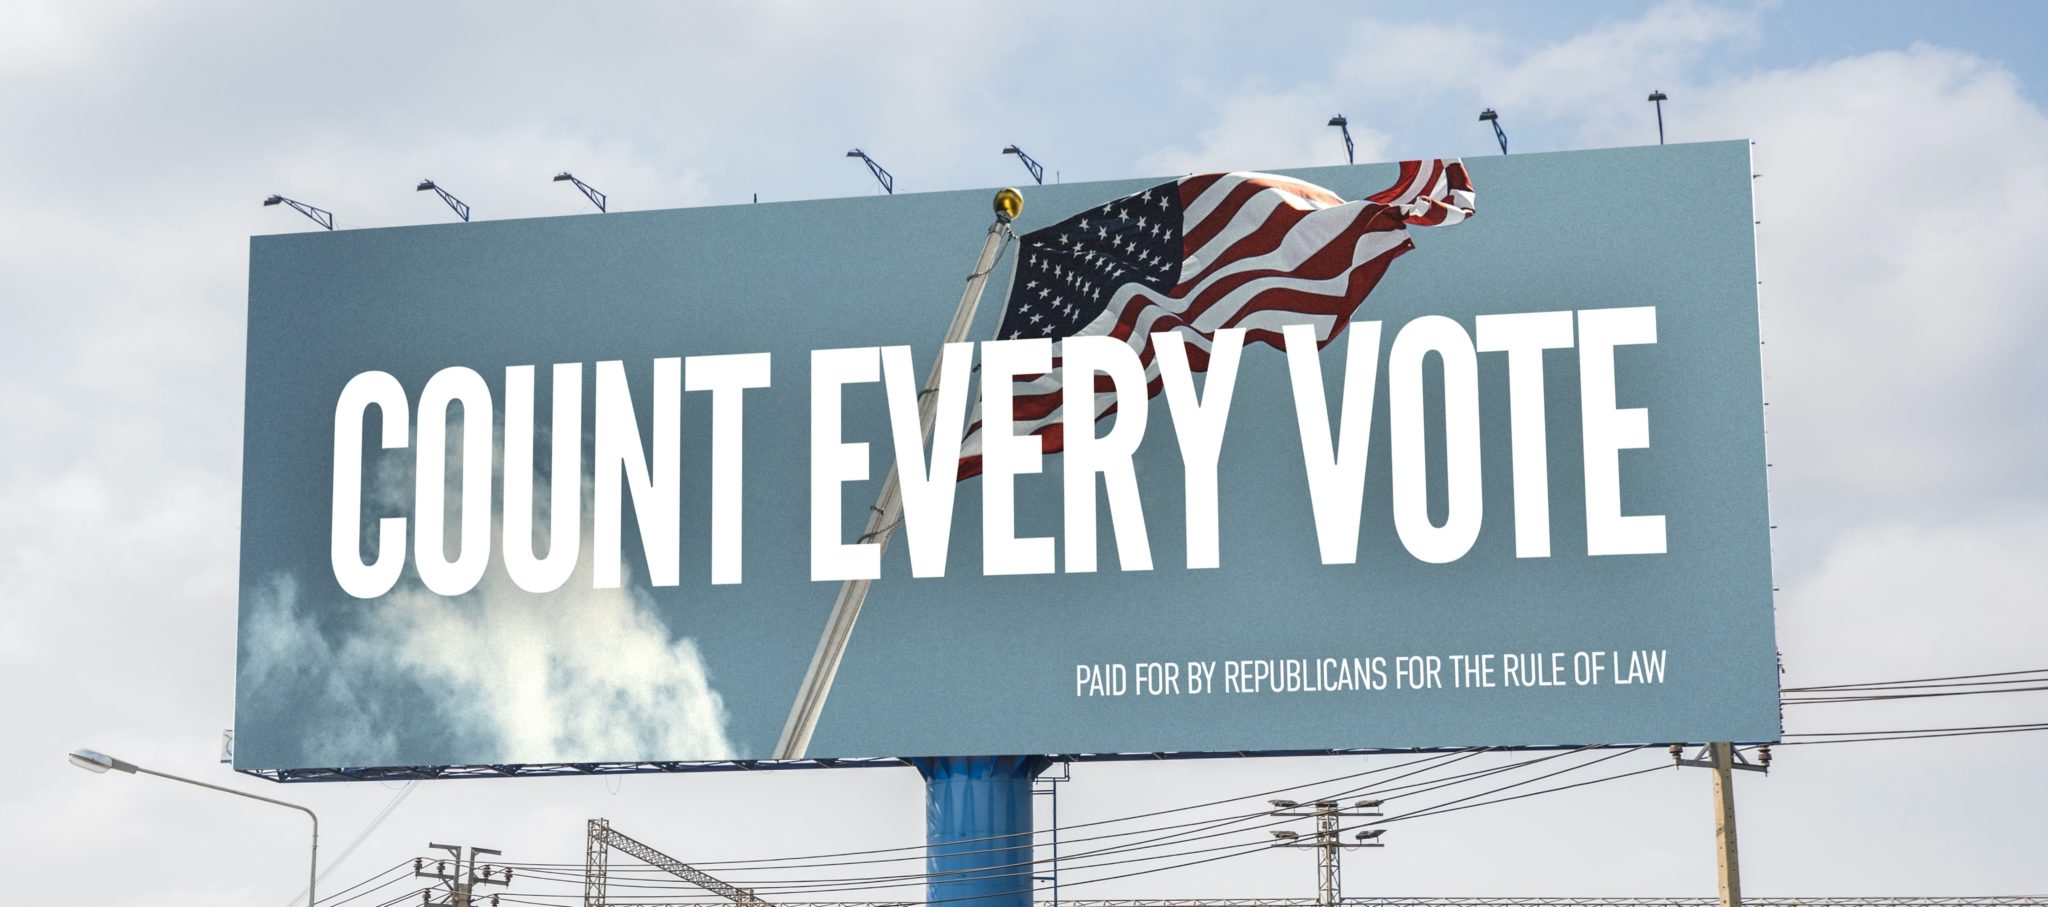 "Count Every Vote" Billboard Campaign Republicans for the Rule of Law